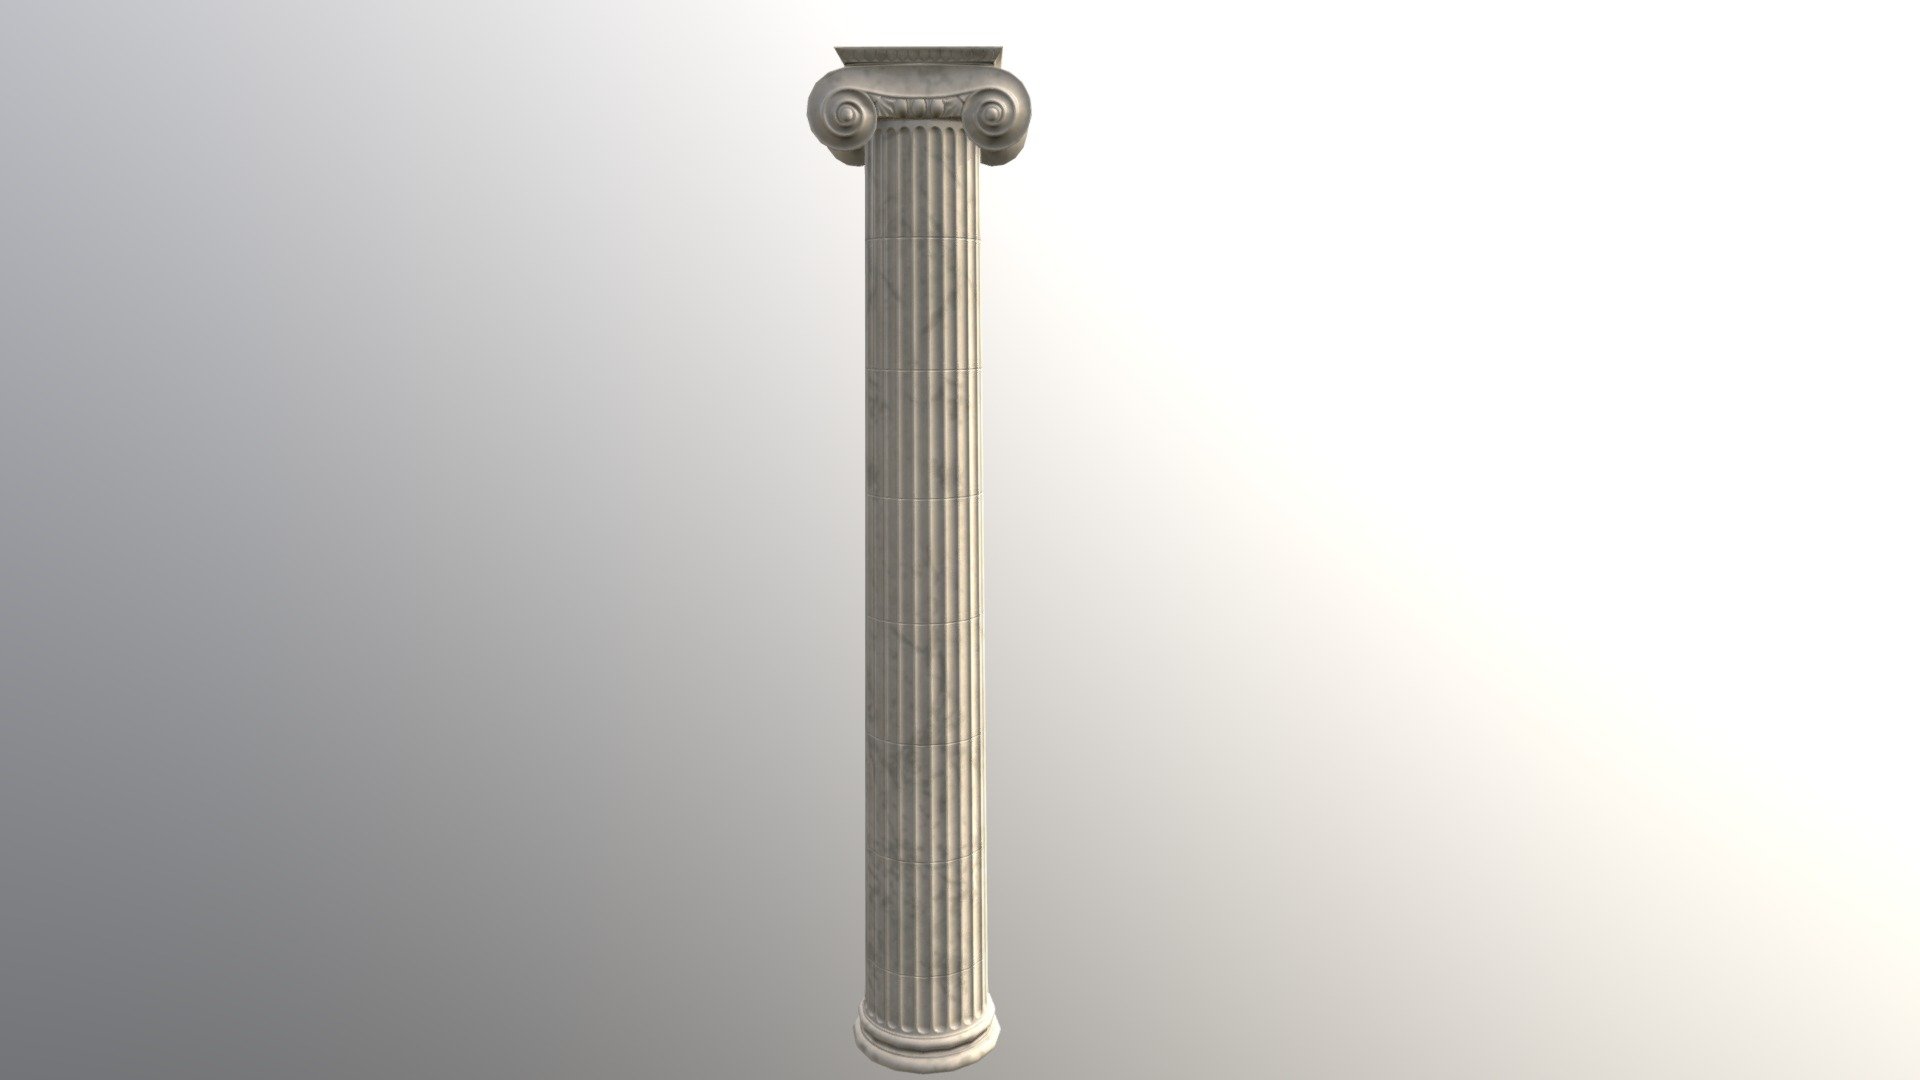 Ionic column low-poly 3d model ready for Virtual Reality (VR), Augmented Reality (AR), games and other real-time apps.

Ancient Greek Ionic Column low-poly 3d model ready for Virtual Reality (VR), Augmented Reality (AR), games and other real-time apps.

Here is a valuable game asset that can be used in all kinds of architectural circumstances. It is a marble column or pillar, in the style of ancient Greece, in the ionic order. Ionic pillars are still used in modern day architecture for a stately look.

This model is ready for your game, and is low poly.

I will be happy if you like it 3d model! See my other 3d models, just click on my user name 3d model